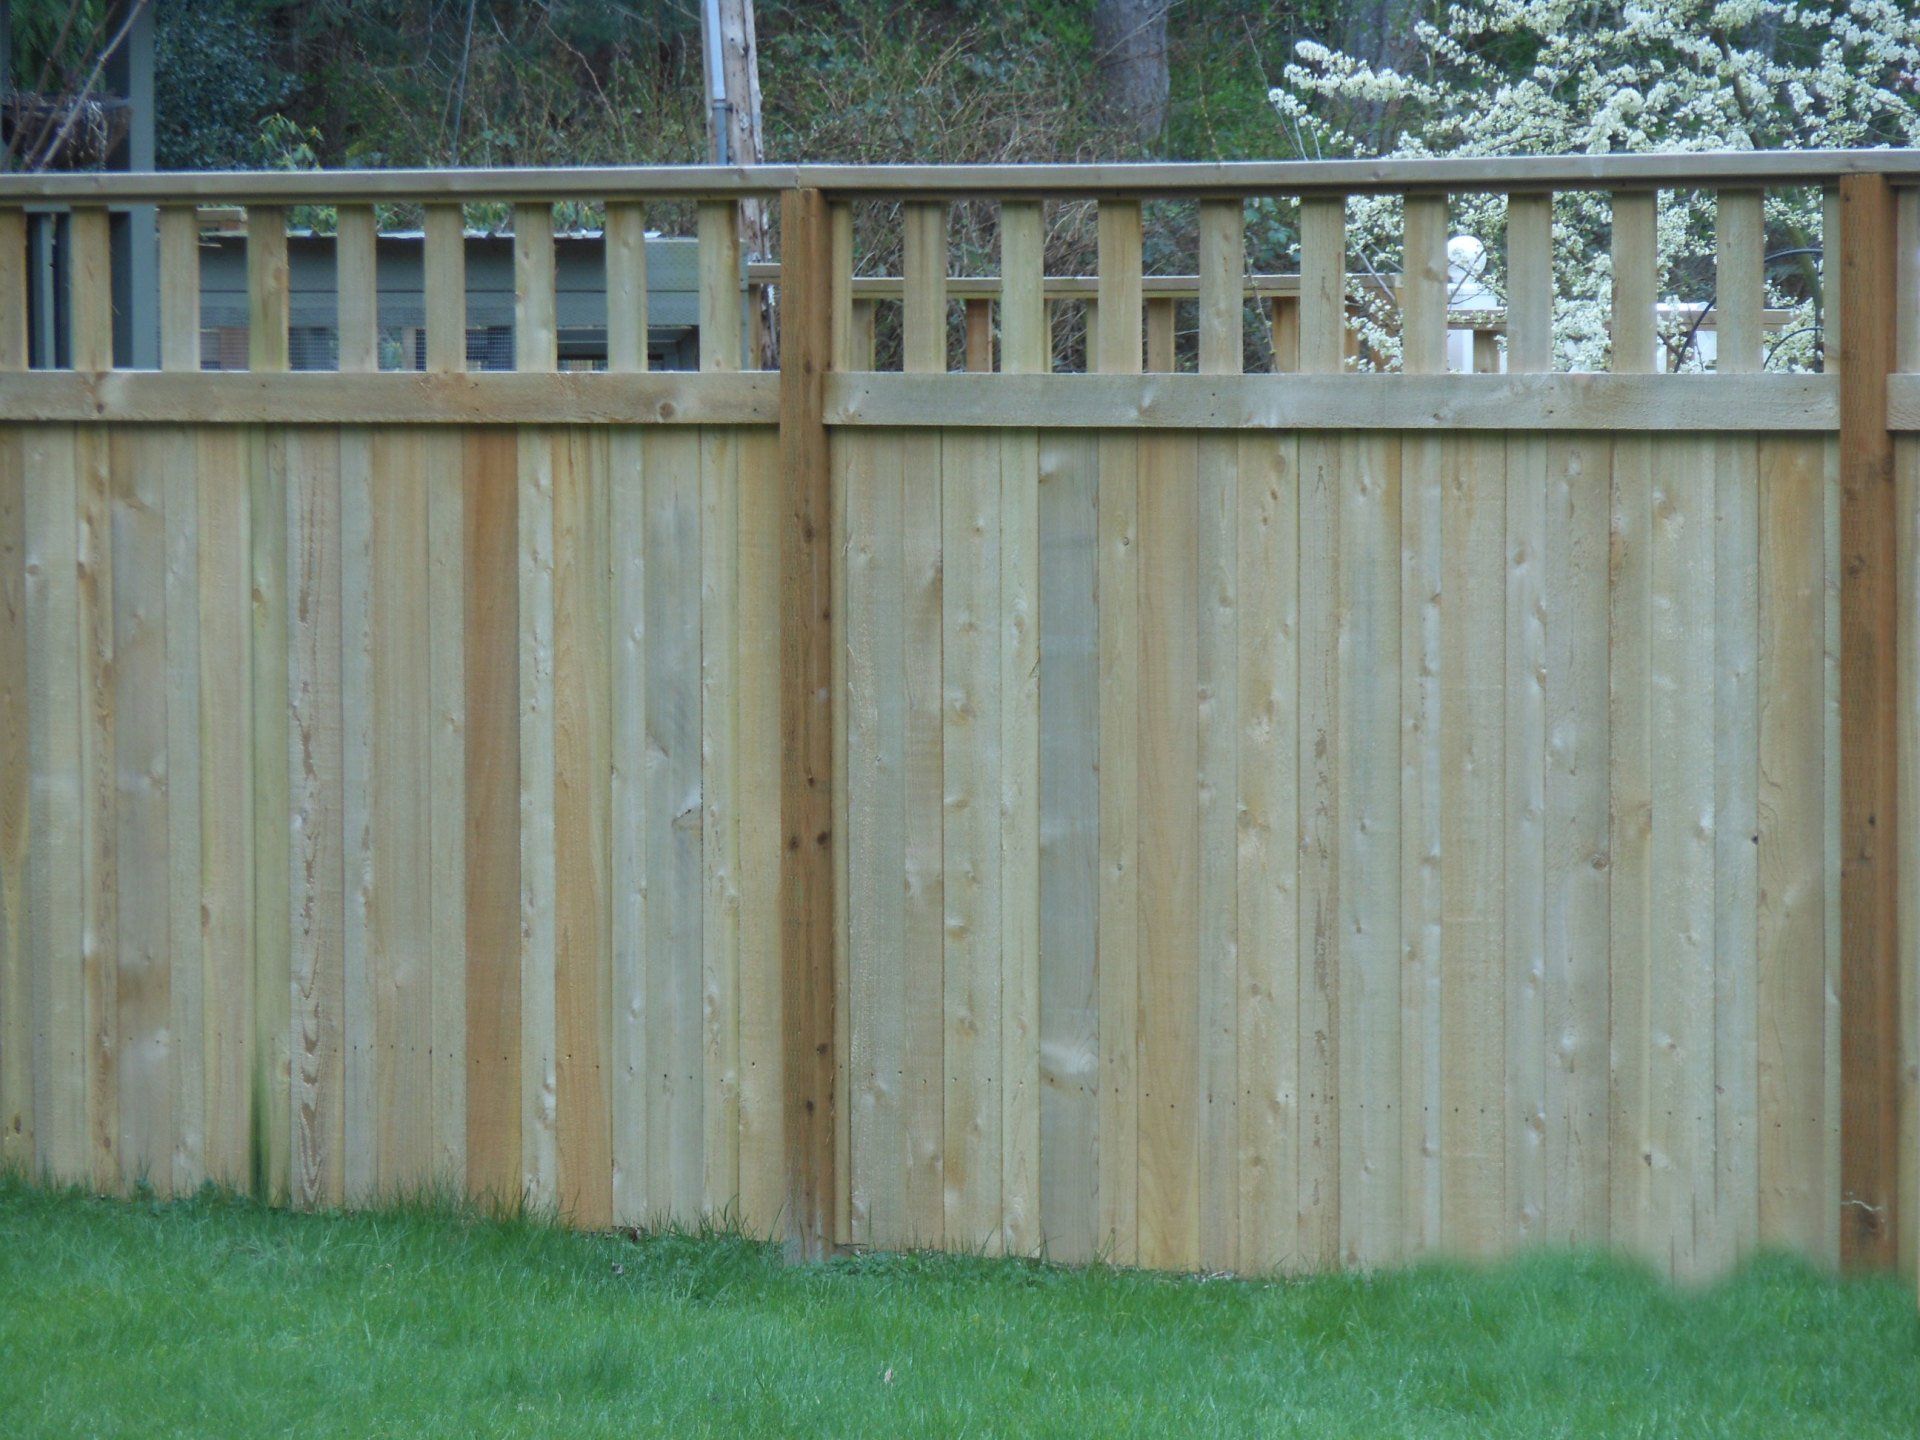 Catwalk fence and deck — Fencing in Fermdale, WA